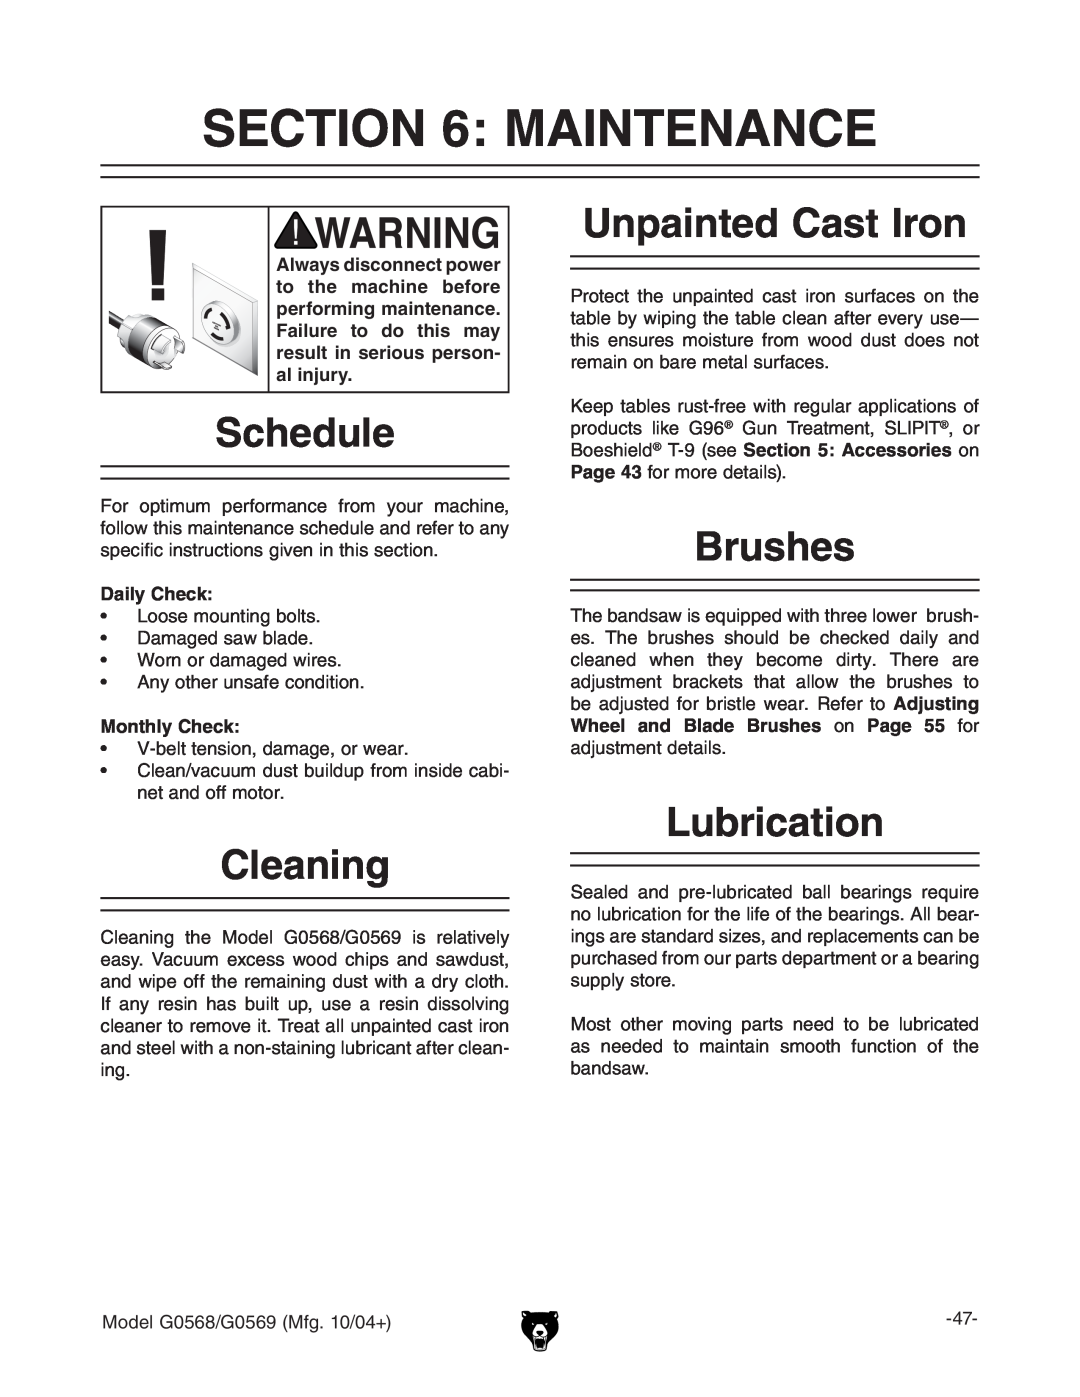 Grizzly G0568 Maintenance, Schedule, Cleaning, Unpainted Cast Iron, Brushes, Lubrication, Daily Check, Monthly Check 